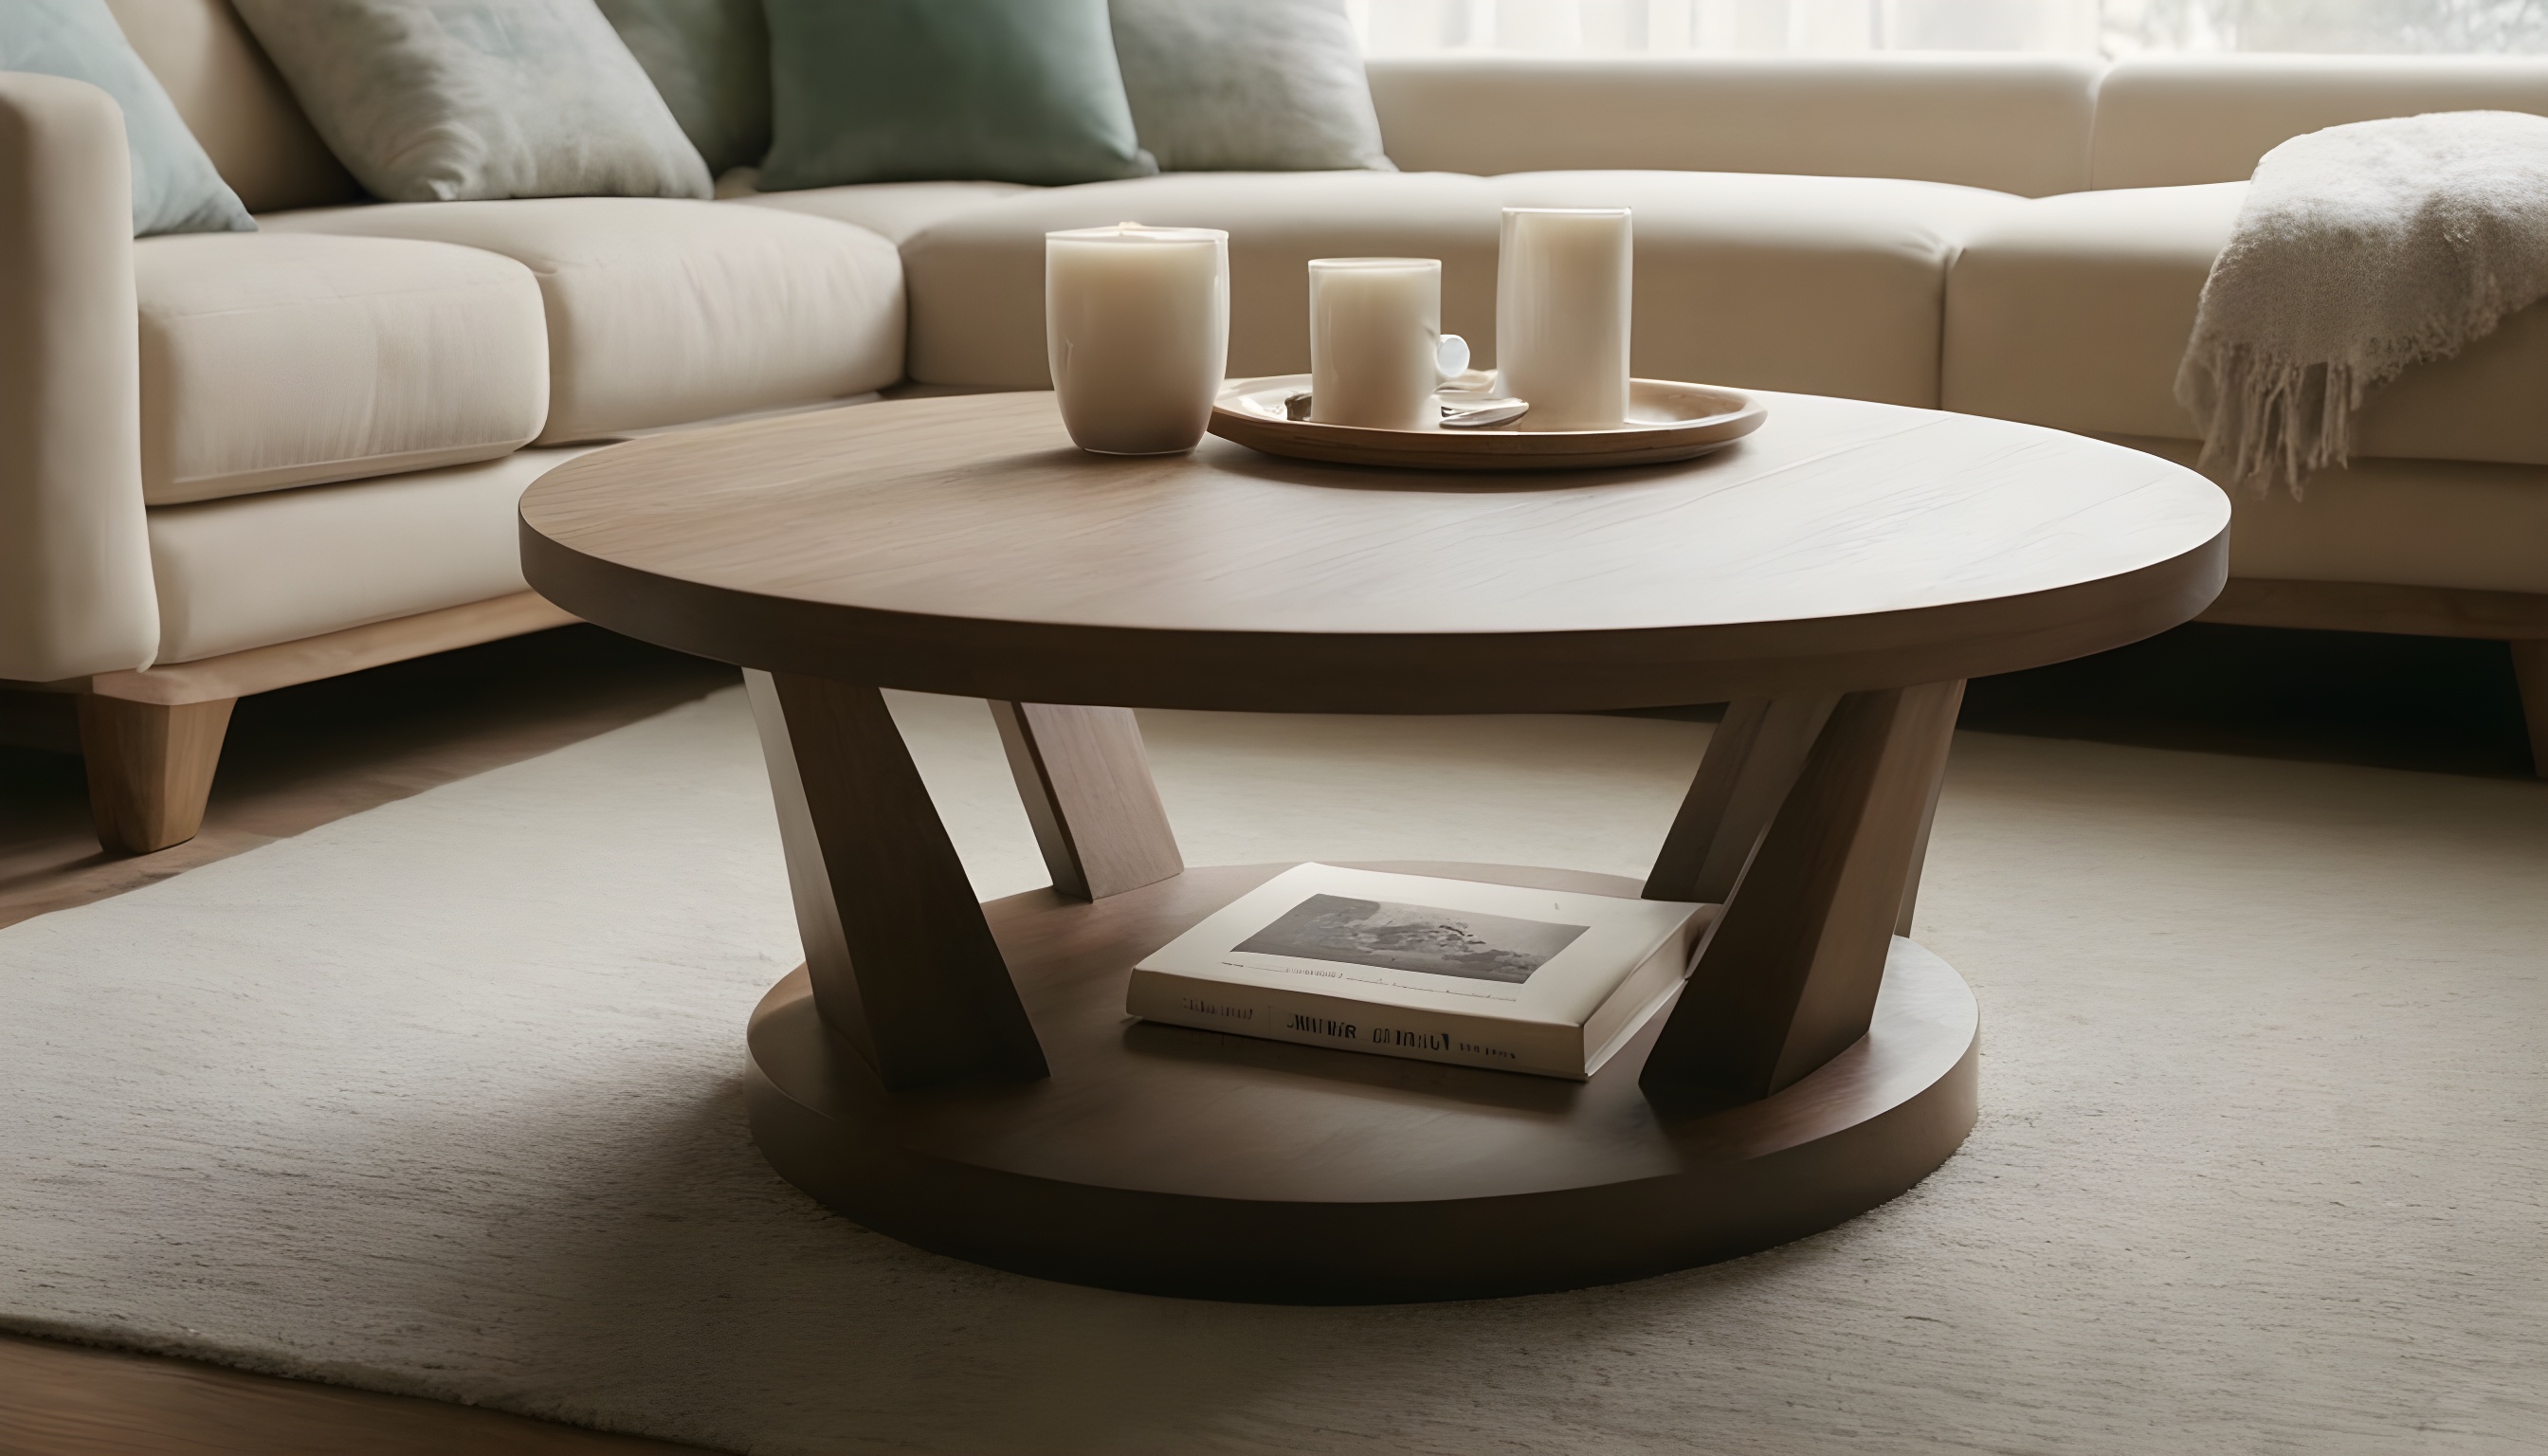 Practicality and functionality of a coffee table